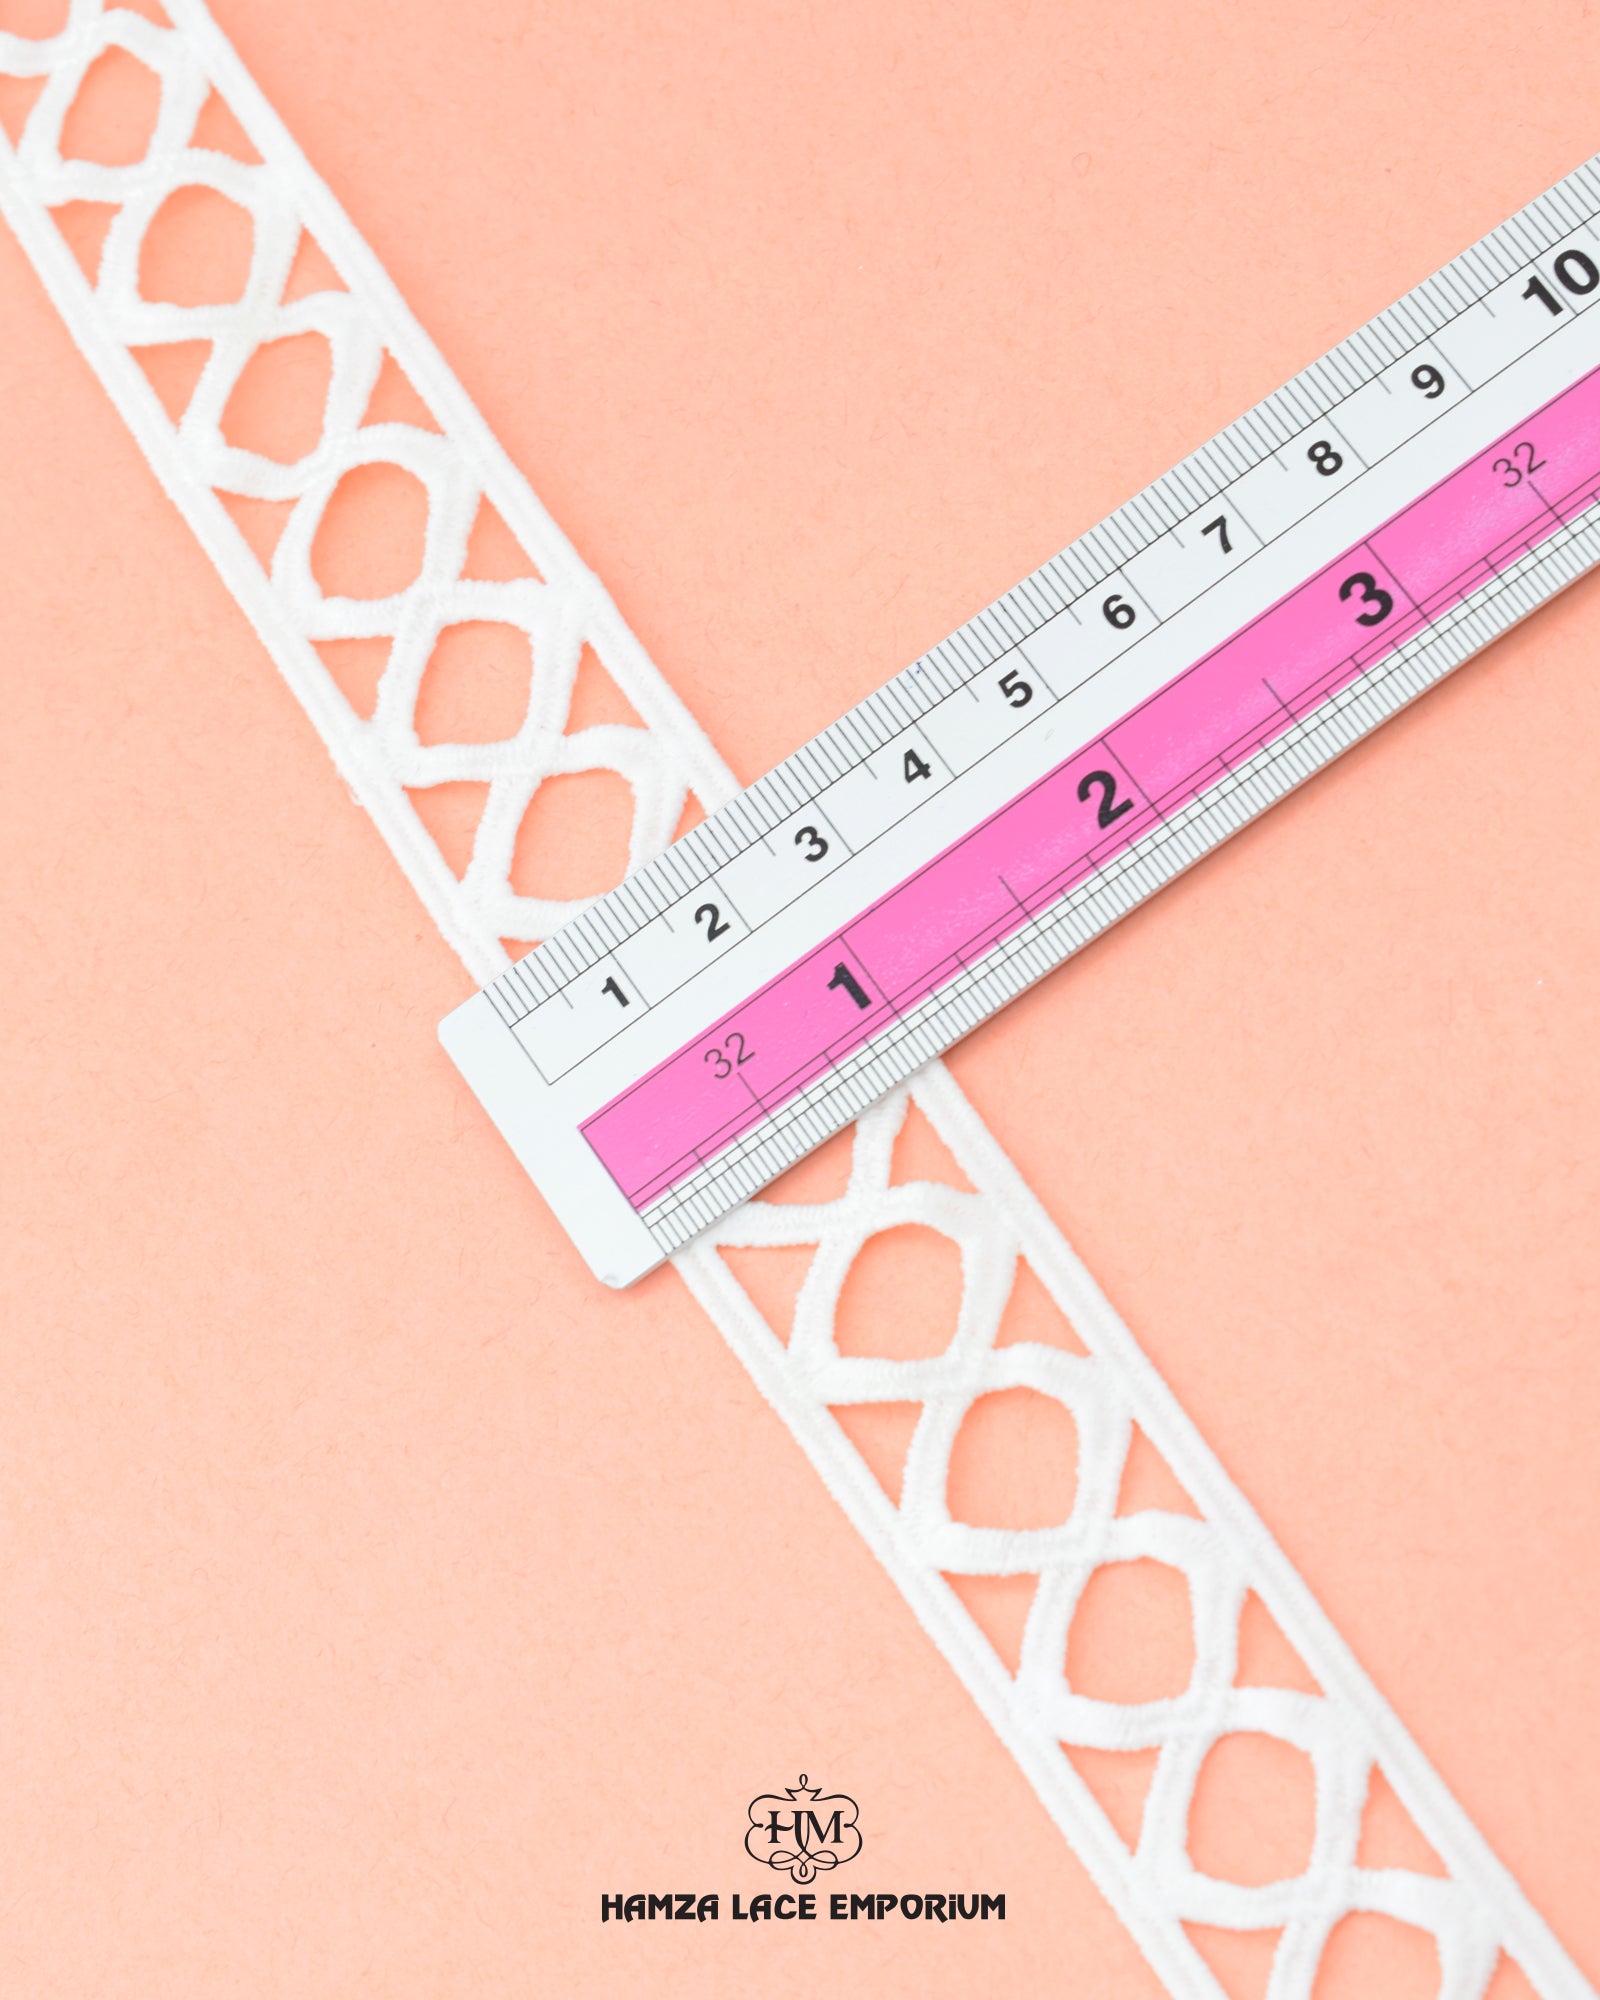 The size of the 'Center Ring Lace 23354' is given with the help of a ruler.